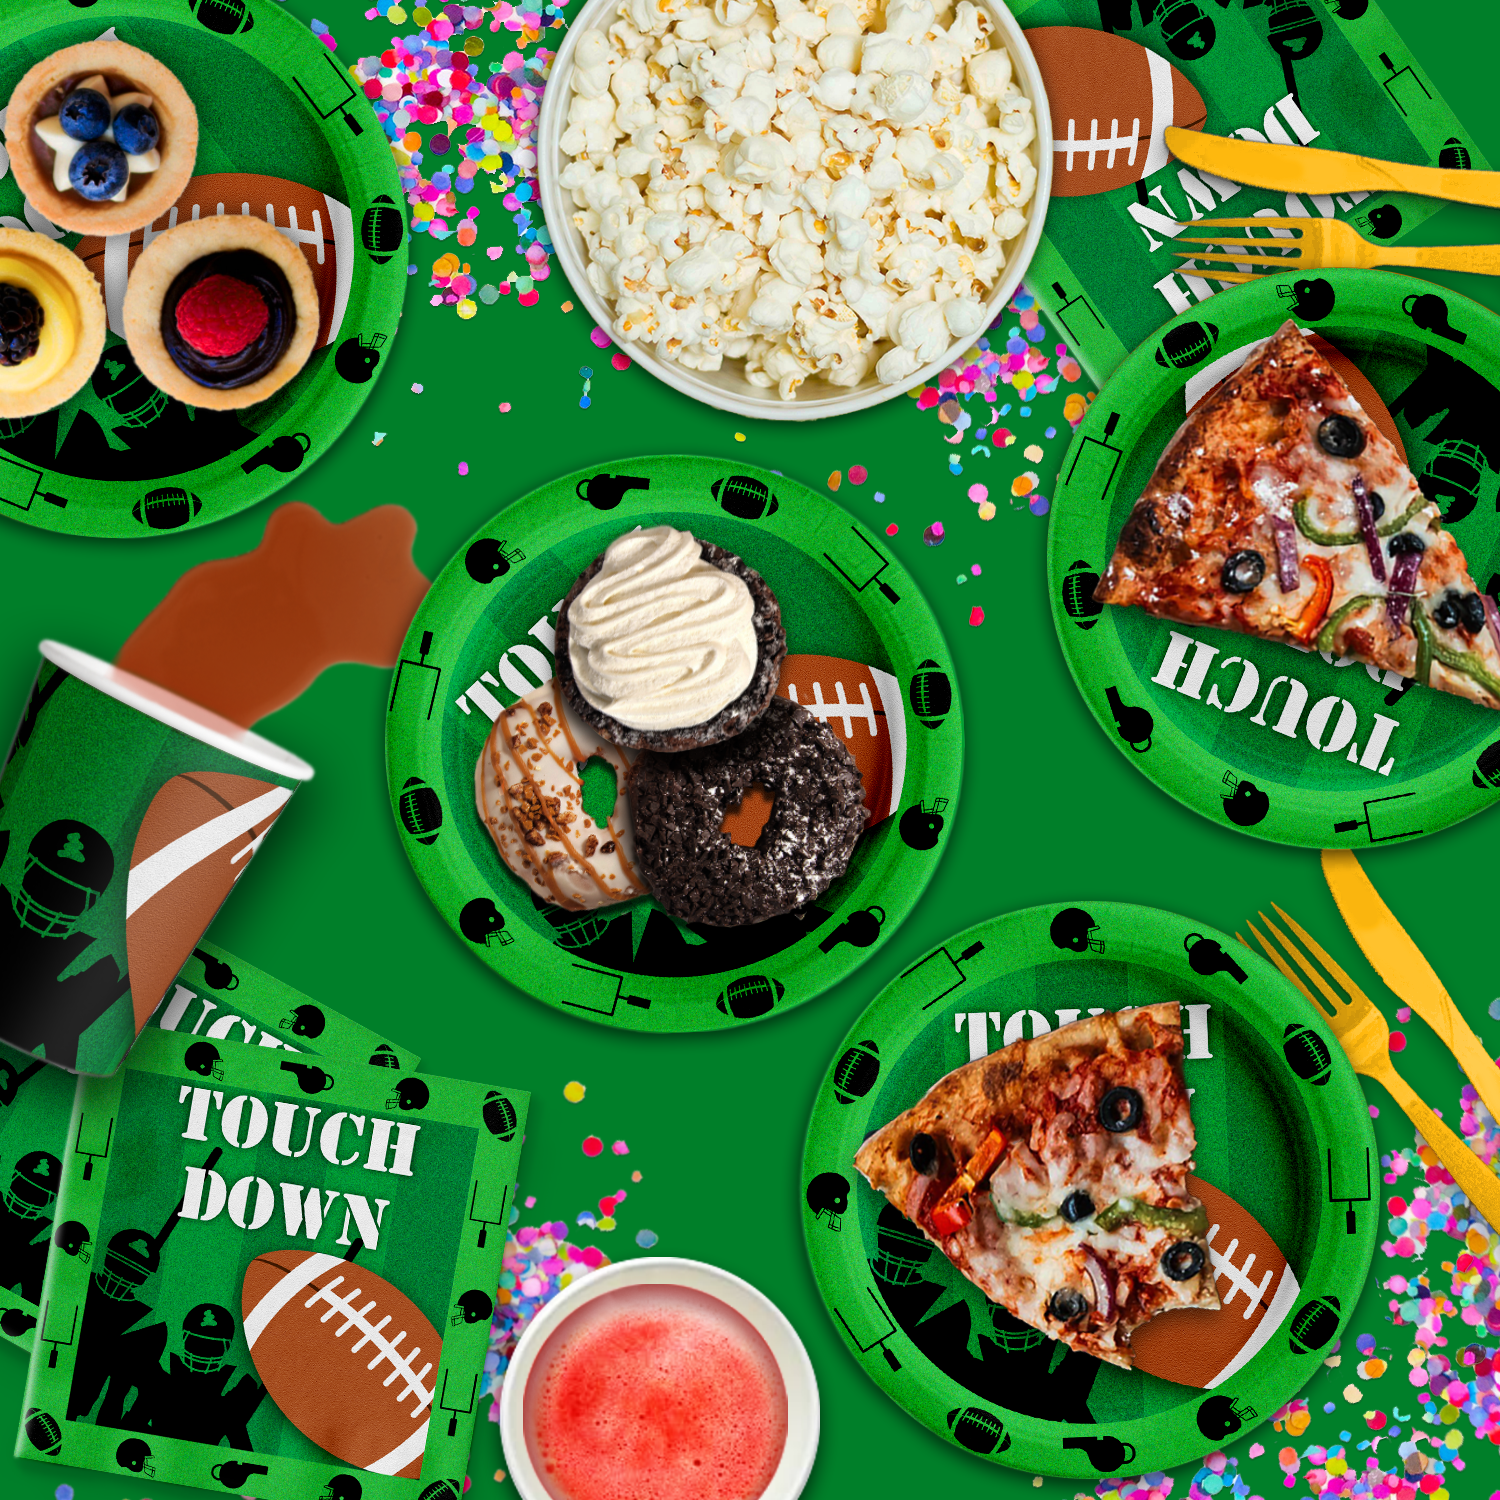 Football Birthday Party Tableware Kit For 16 Guests - BirthdayGalore.com